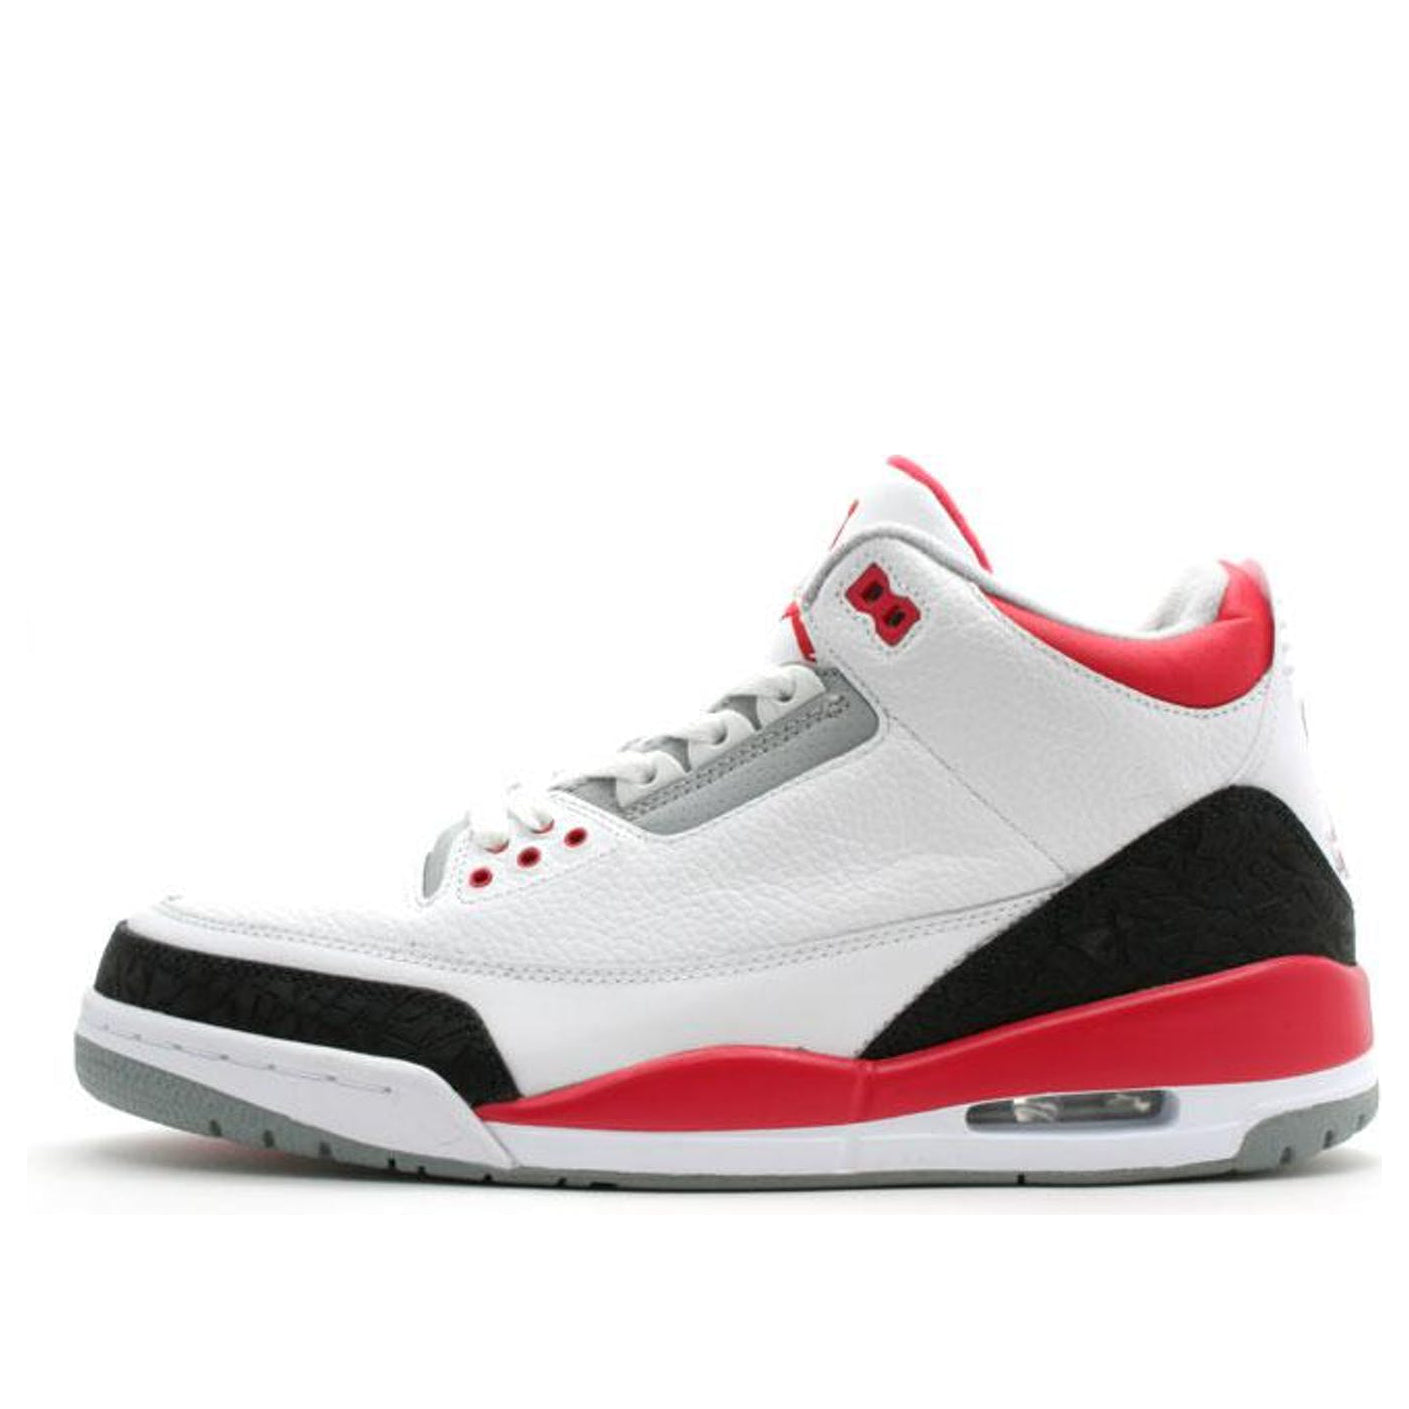 Air Jordan 3 Retro 'Fire Red' 2007 White/Fire Red-Cement Grey 136064-161